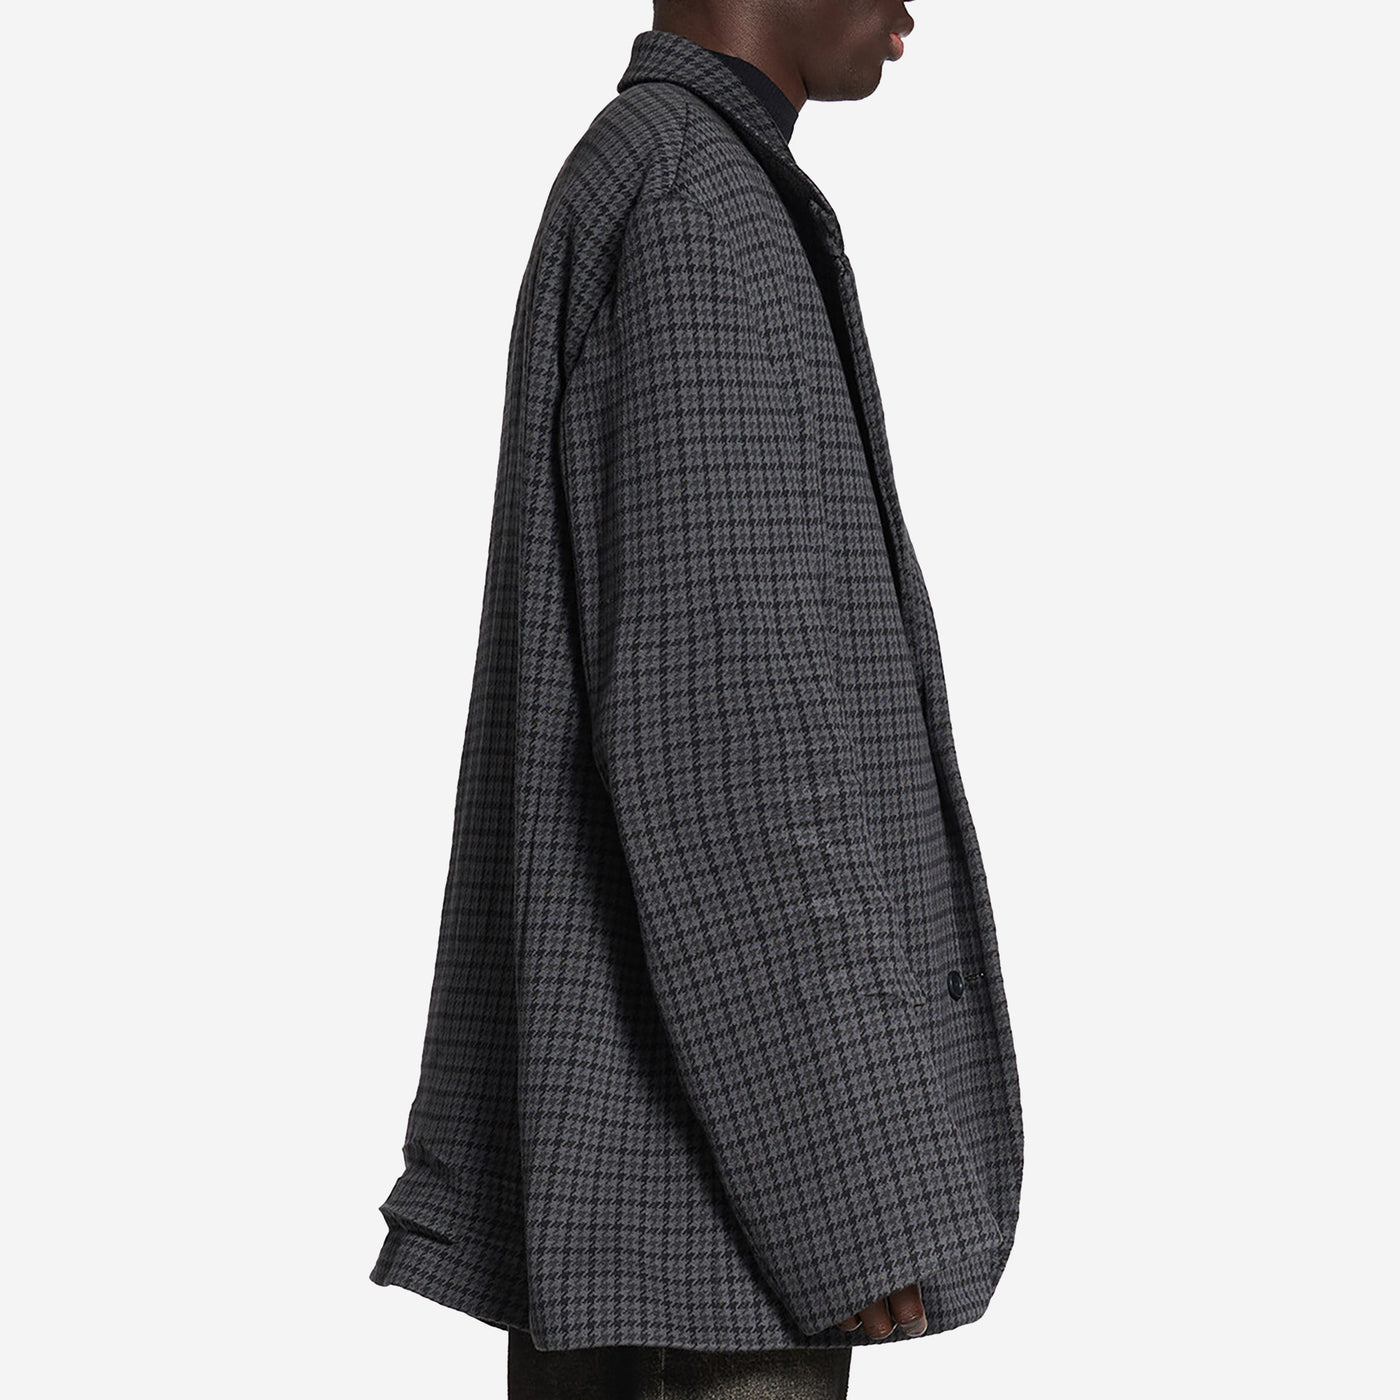 Balenciaga Tailored Knitted Houndstooth Jacket